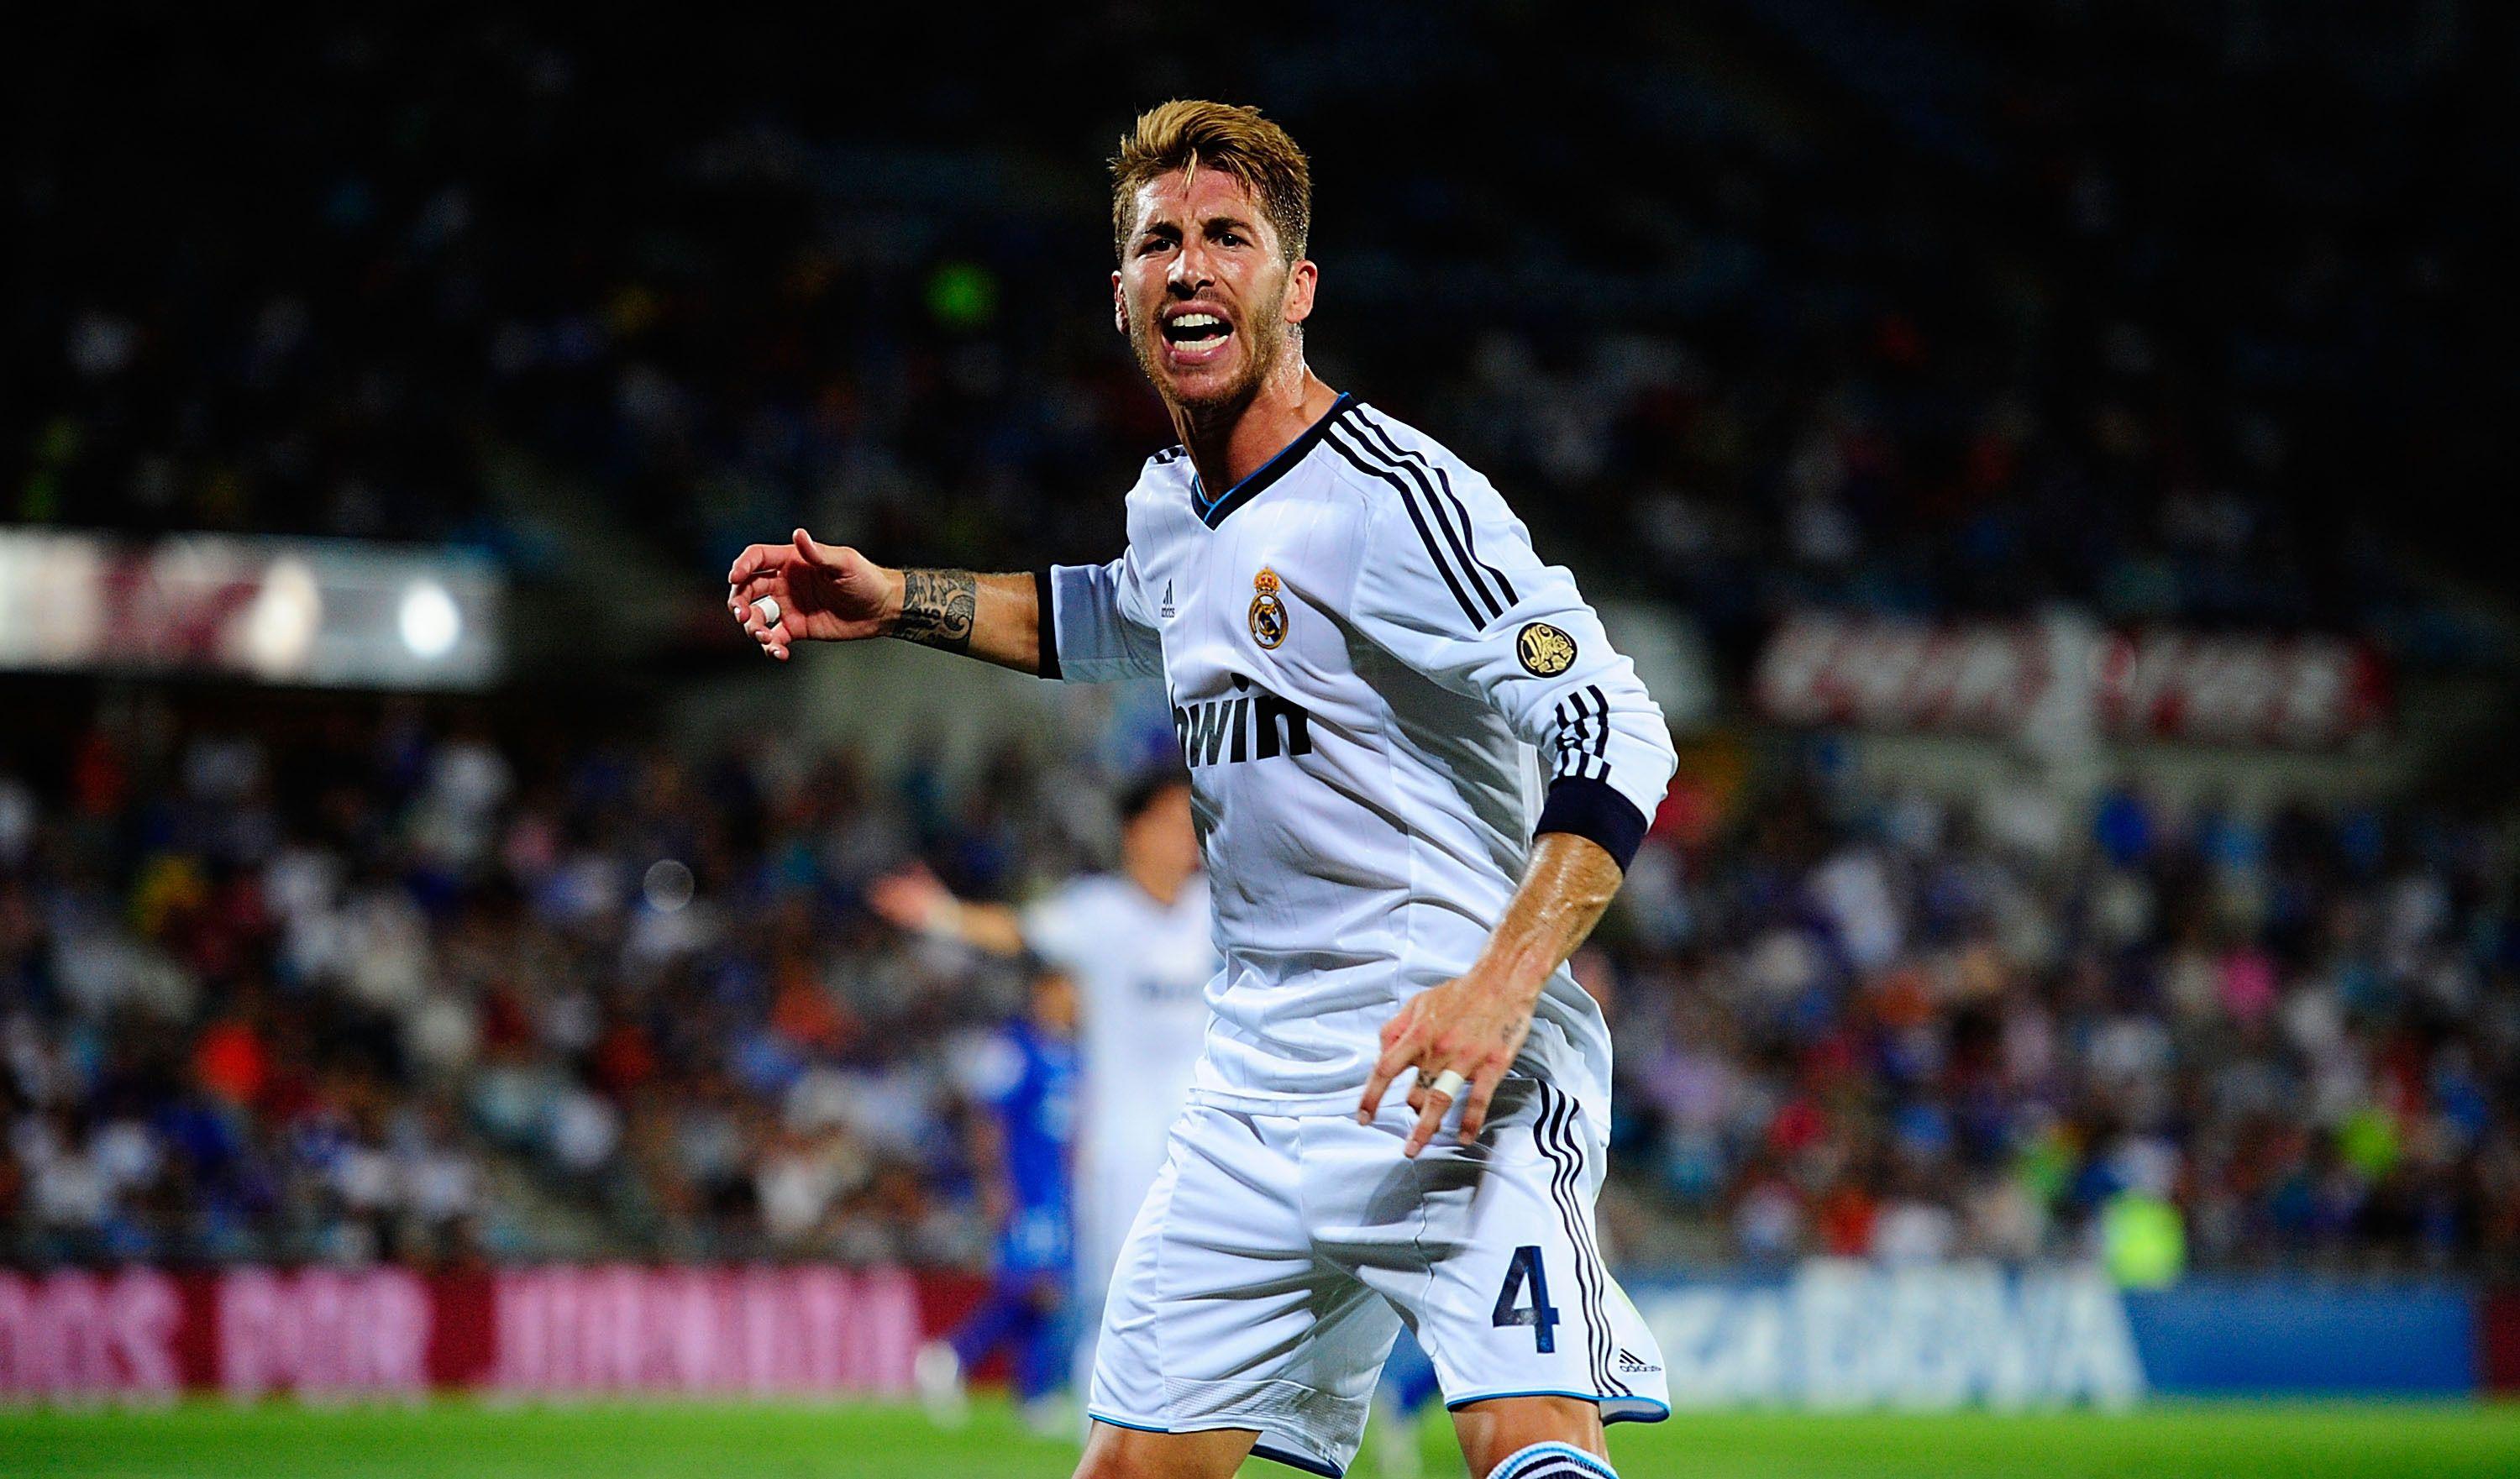 Real Madrid Sergio Ramos is amazing player wallpaper and image